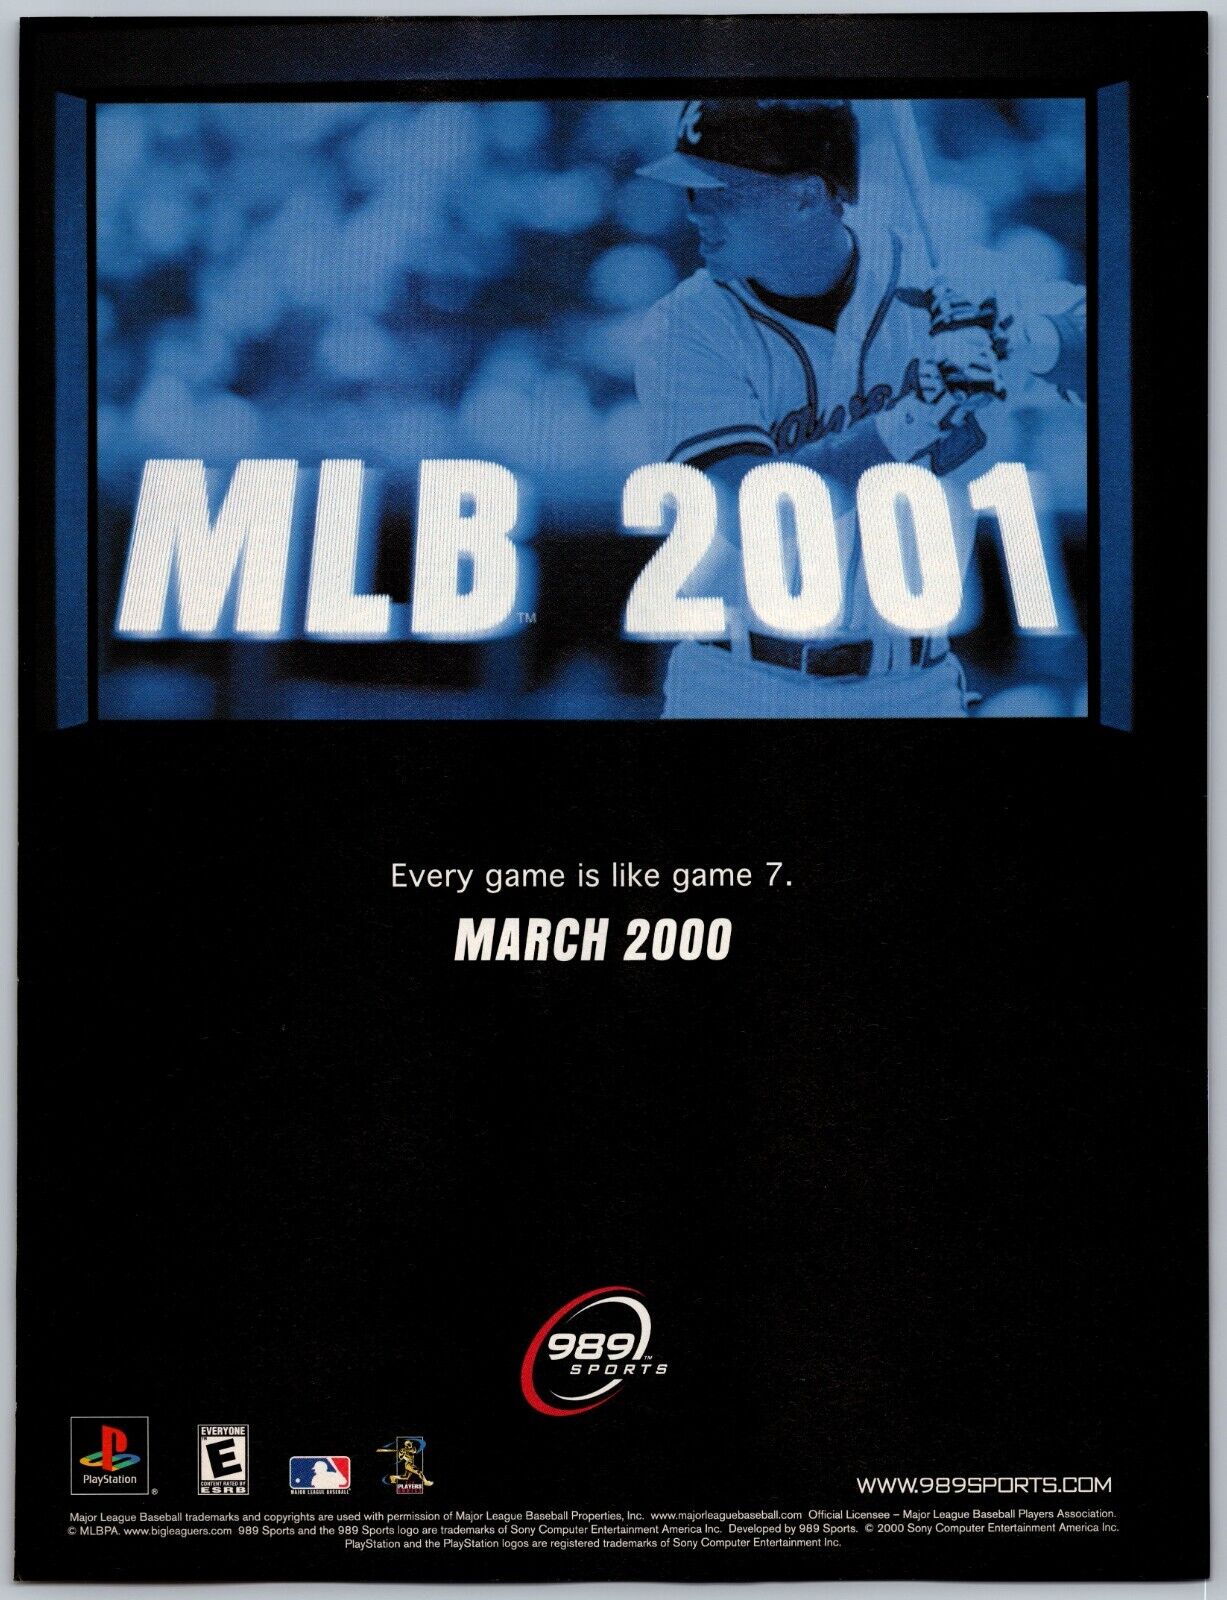 989 Sports MLB 2001 Playstation PS1 Game Promo March, 2000 Full Page Print Ad